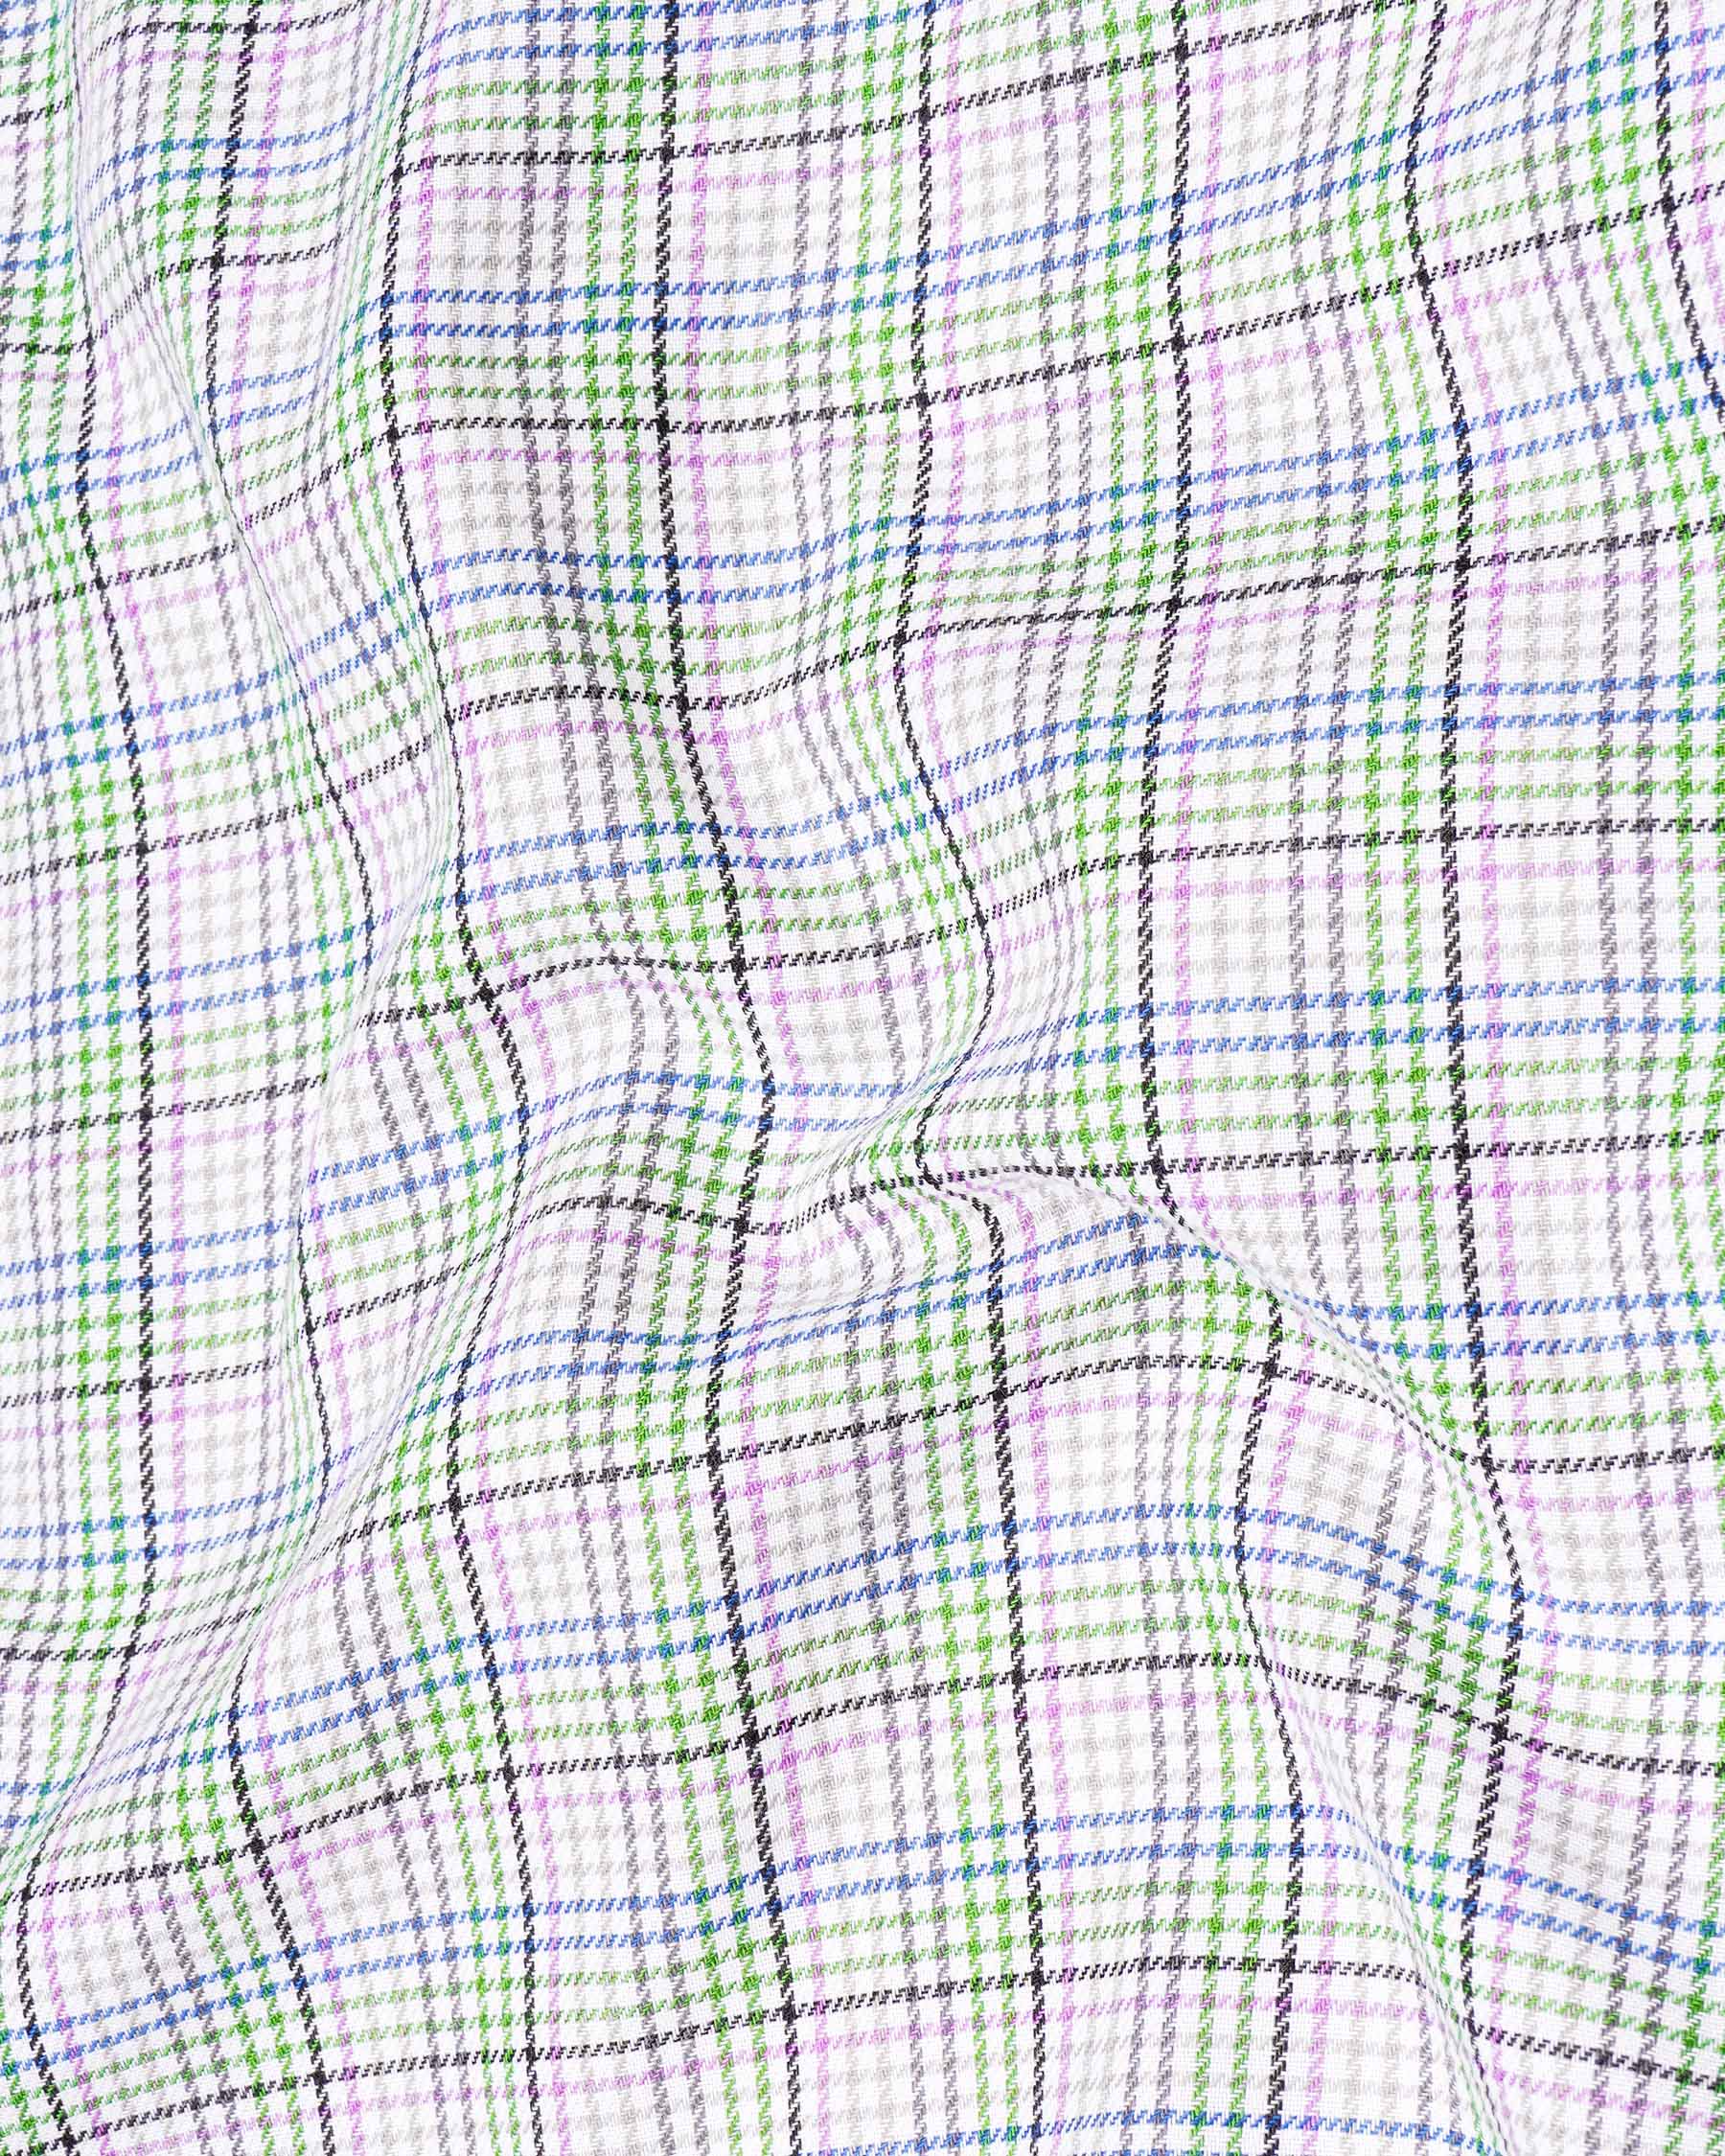 Mantis Green and White with Multi colored Plaid Twill Premium Cotton Shirt